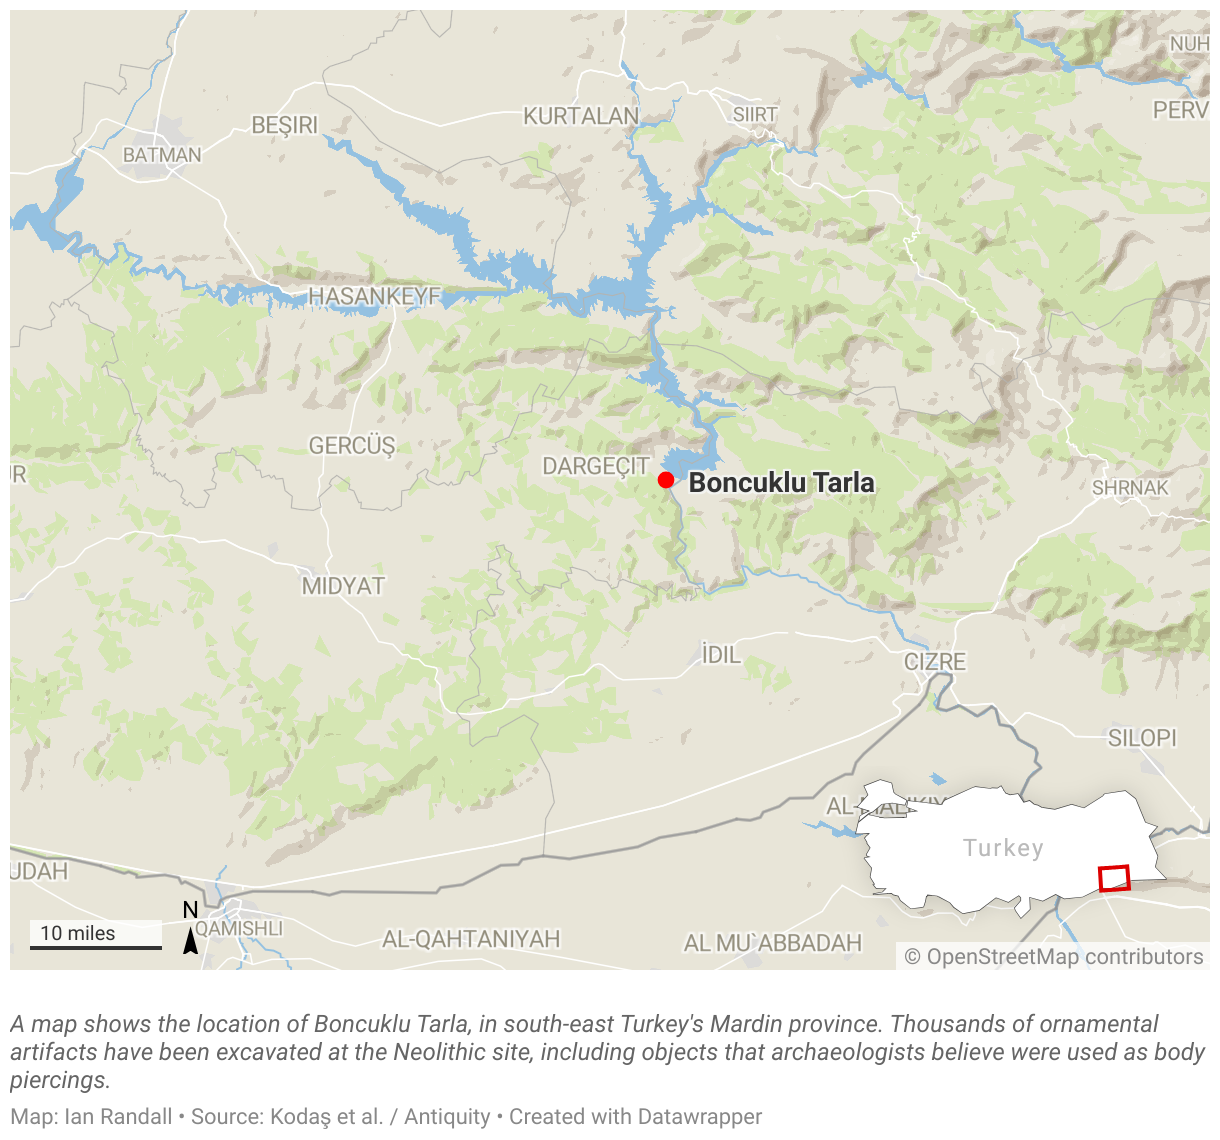 A map shows the location of Boncuklu Tarla, in south-east Turkey's Mardin province.